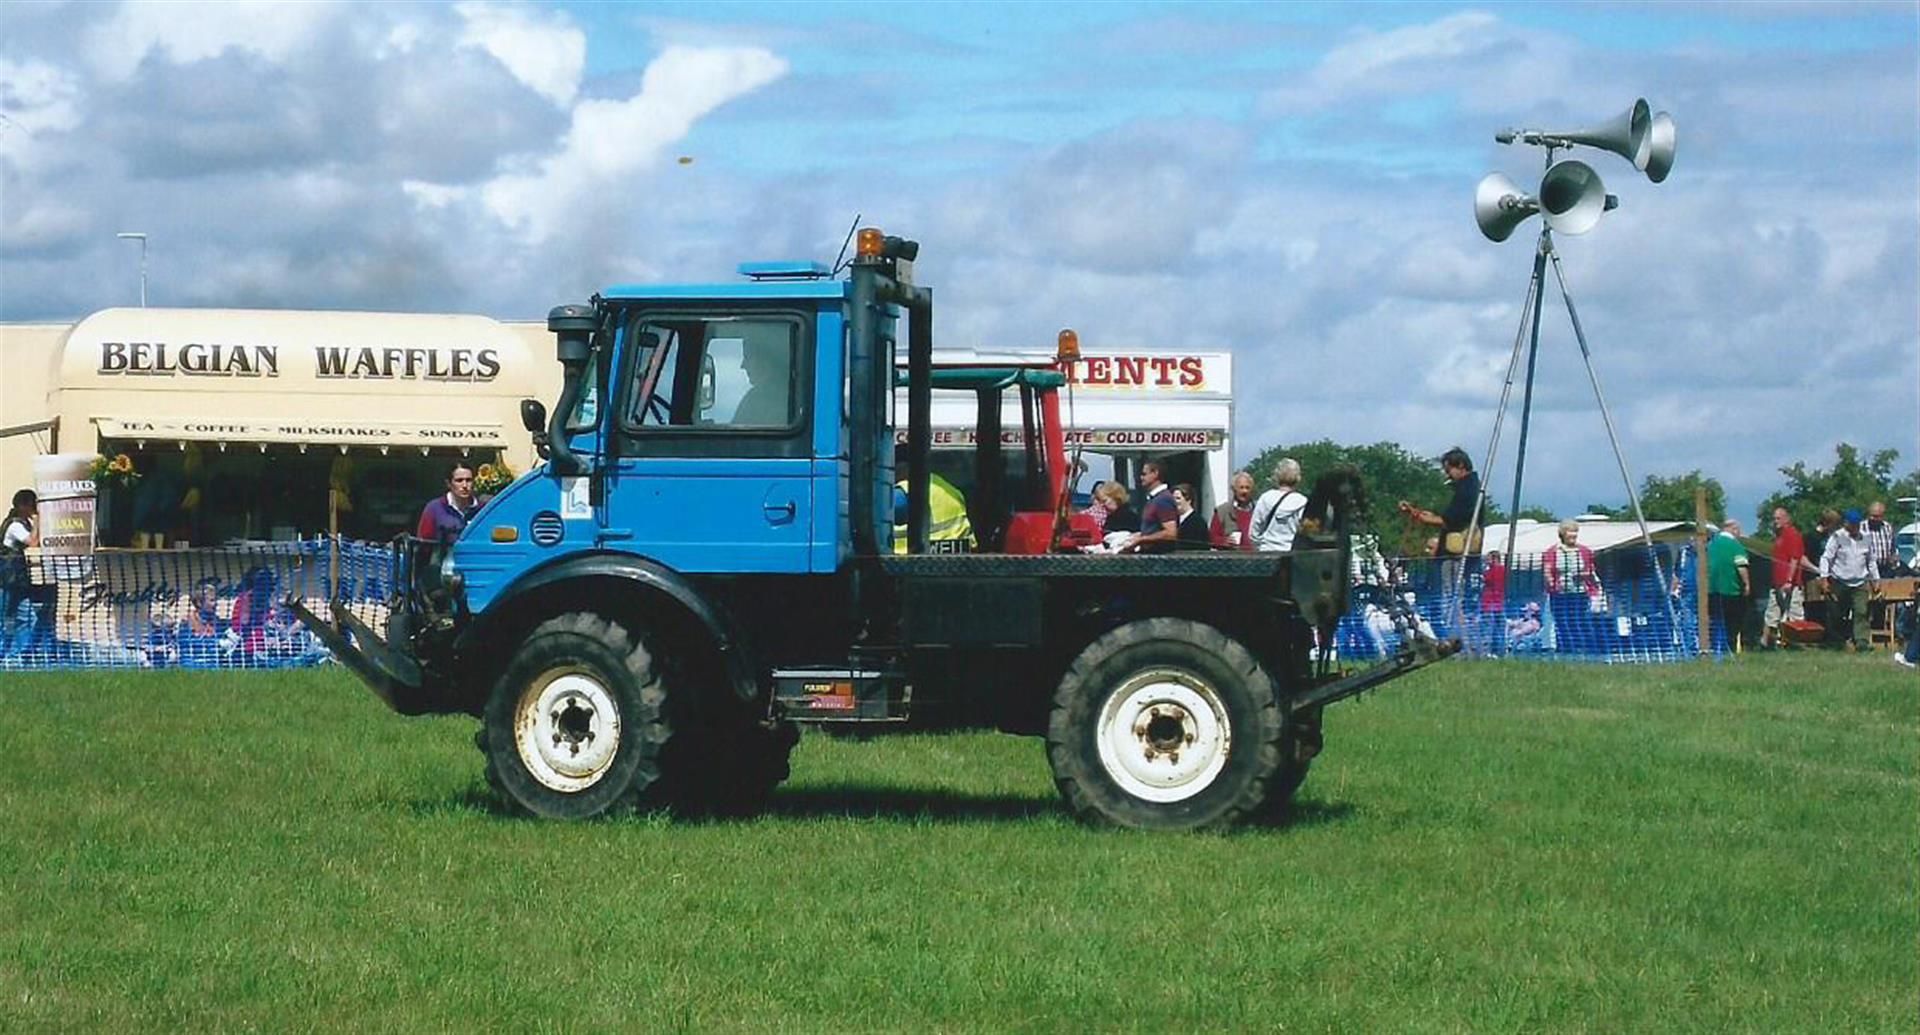 1979 Mercedes Benz Unimog 900 Reg. No. JNV 377T Chassis No. 40612012032199 Finished in blue over